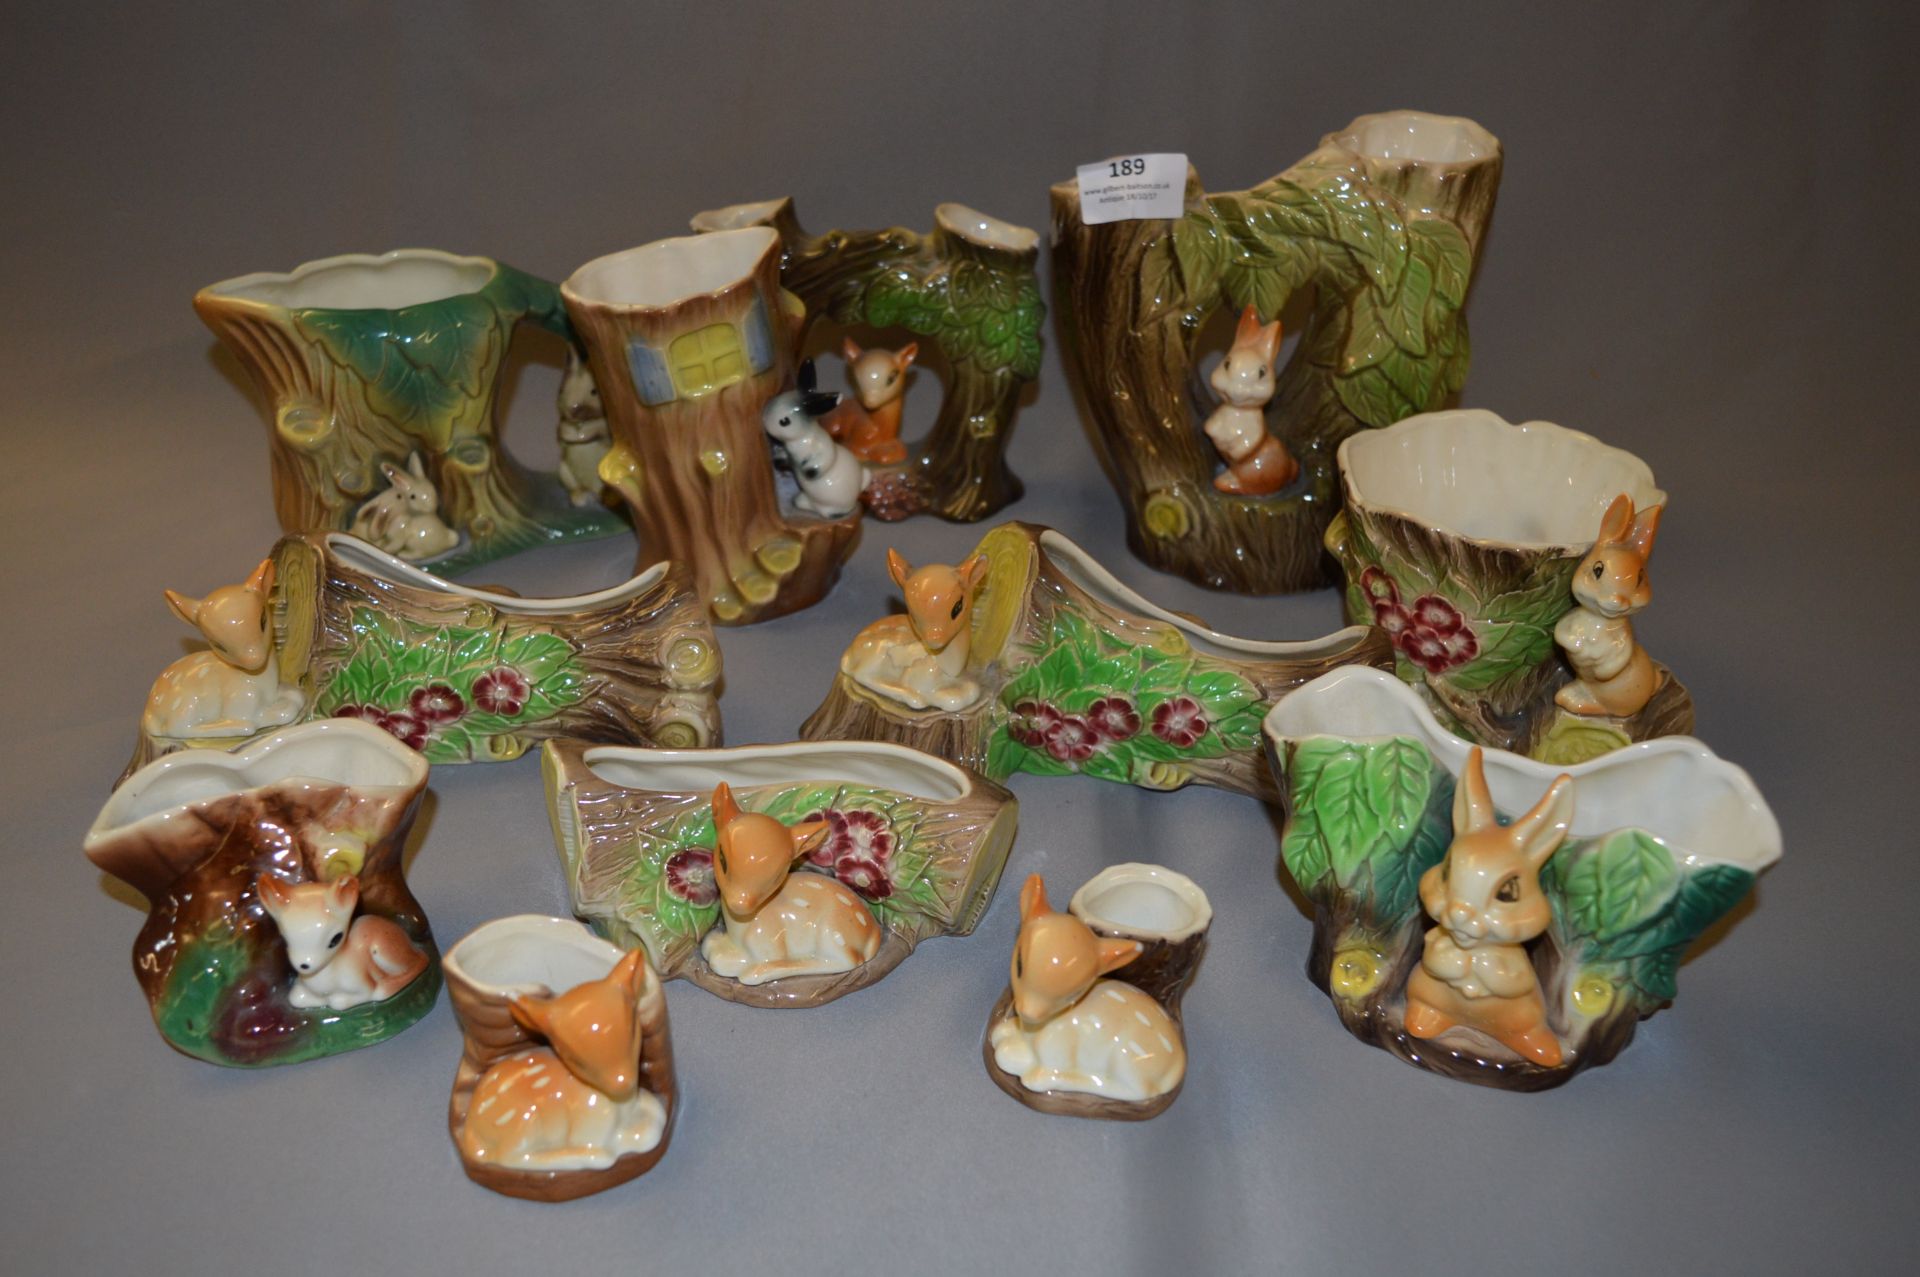 Collection of Hornsea Pottery Vases, Rabbits & Deers